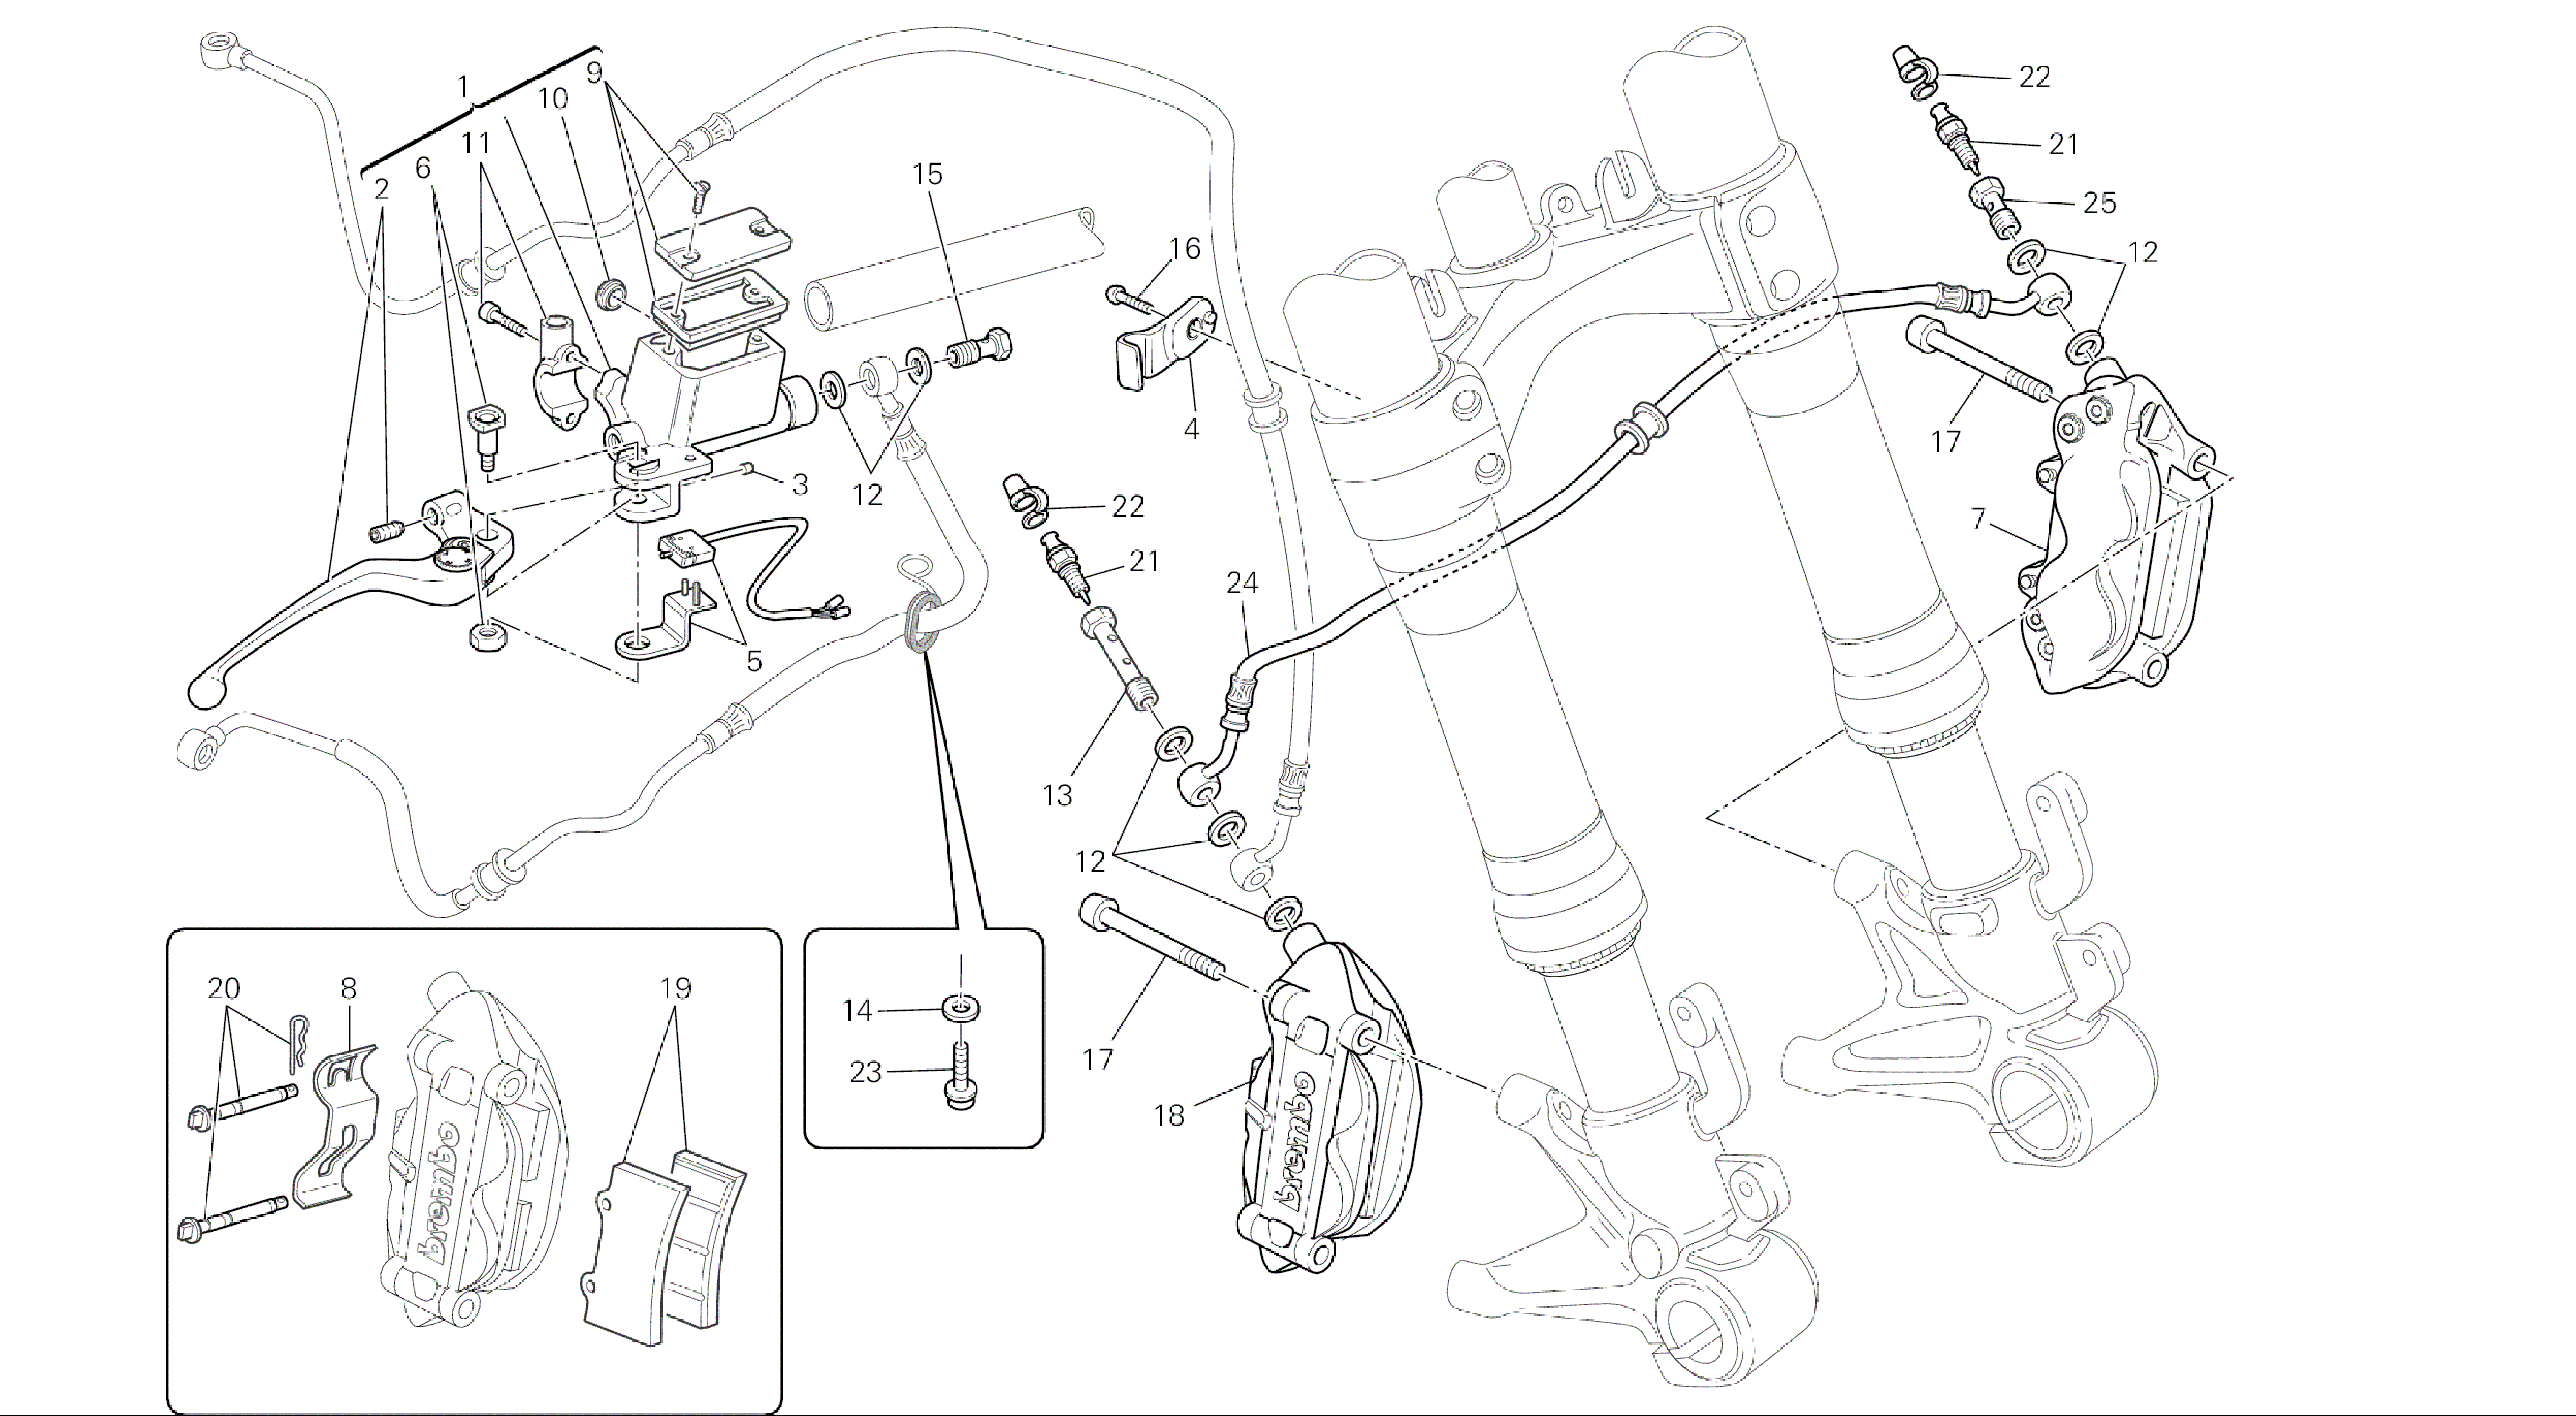 DRAWING 028 - FRONT BRAKE SYSTEM [MOD:M696 ABS,M696+ABS;XST:AUS,EUR,JAP]GROUP FRAME